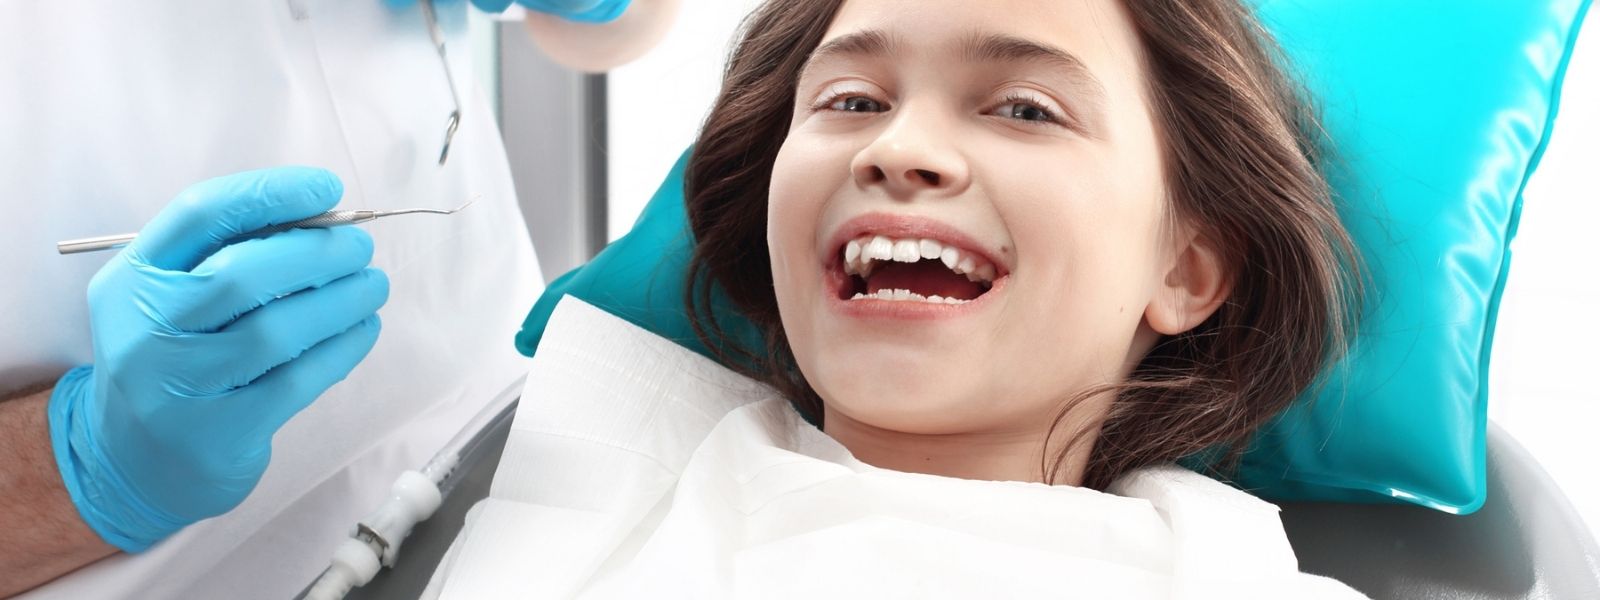 Small girl in a Dental chair smiling happy